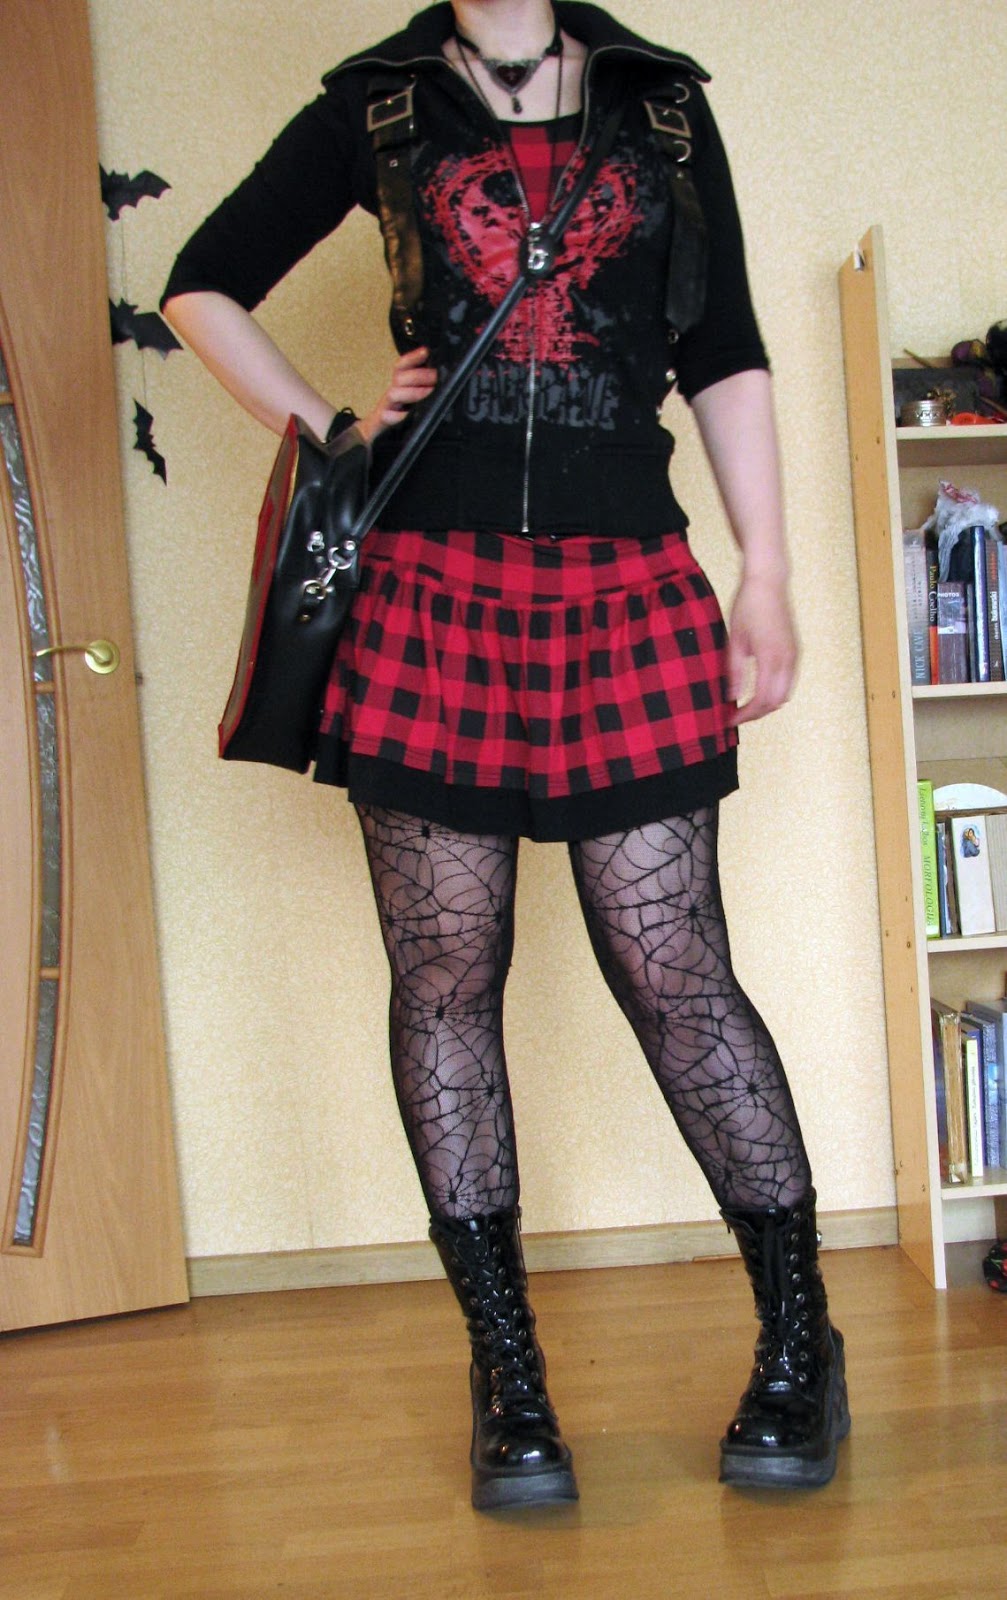 Gothically yours....: Tartan dress and coffin bag